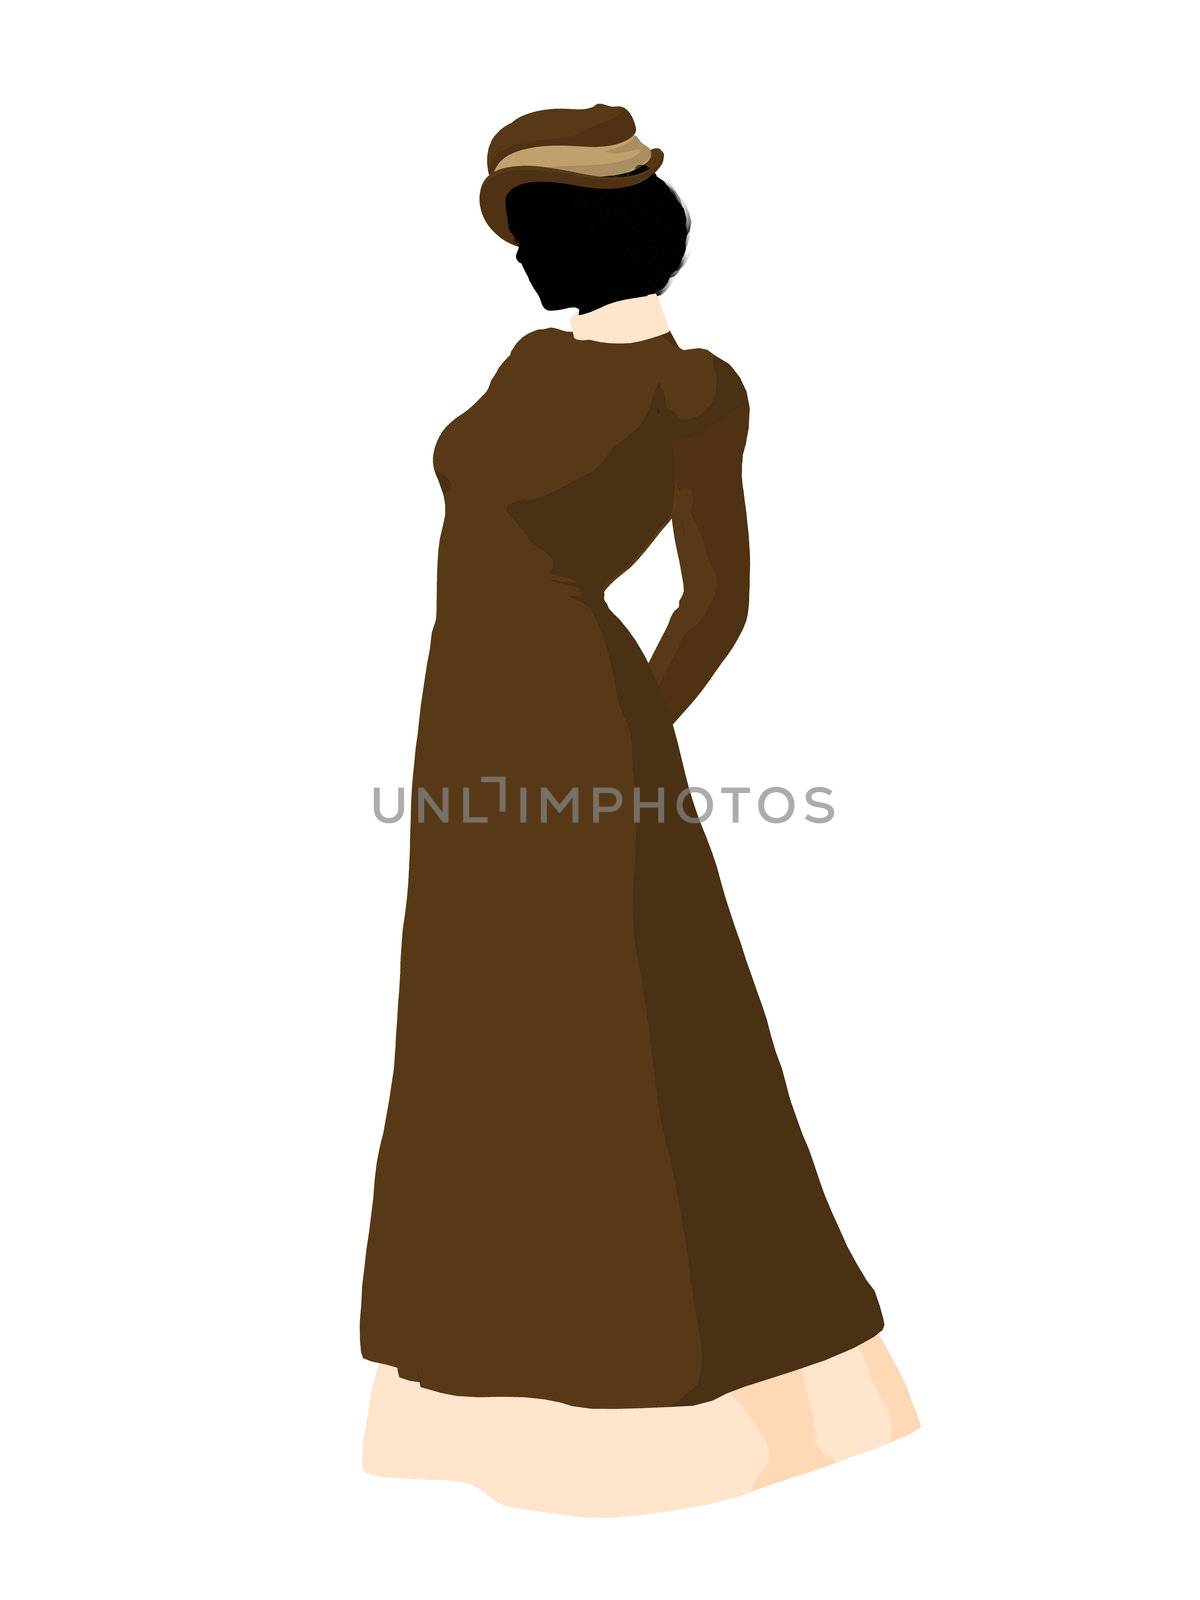 Victorian Woman Illustration Silhouette by kathygold